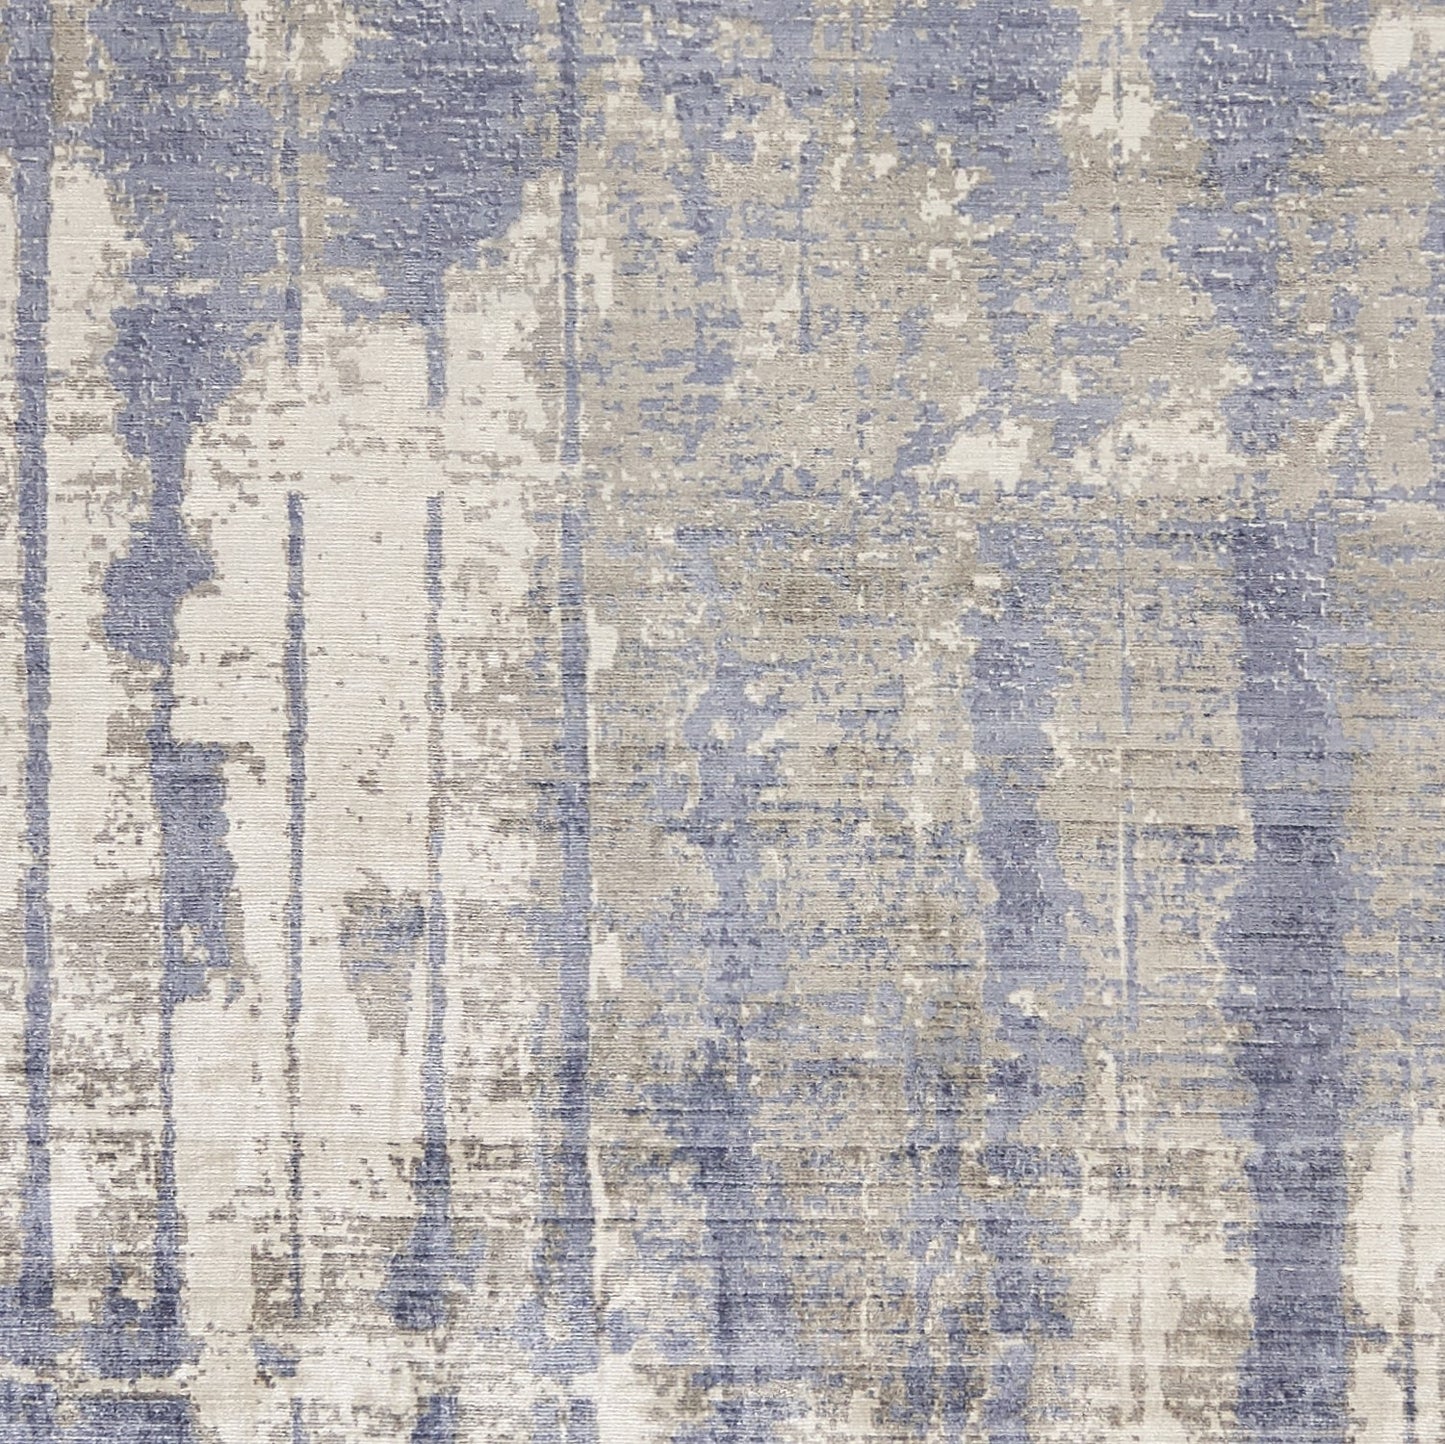 8' x 11' Blue and Gray Abstract Hand Loomed Area Rug